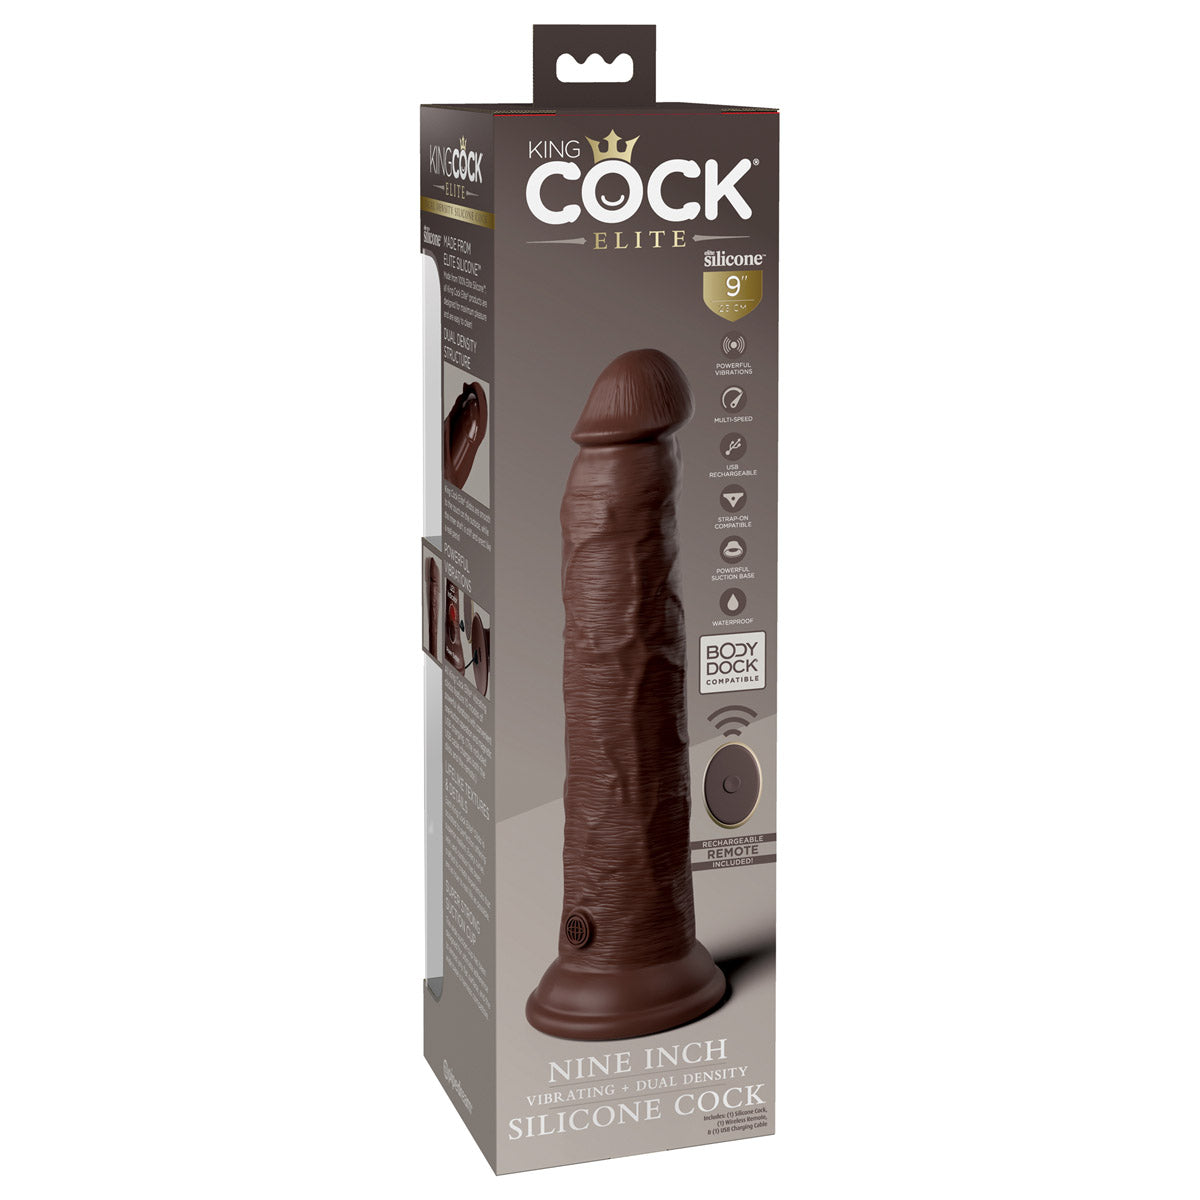 King Cock Elite 9" Dual Density Vibrating Silicone Cock with Remote - Brown - Thorn & Feather